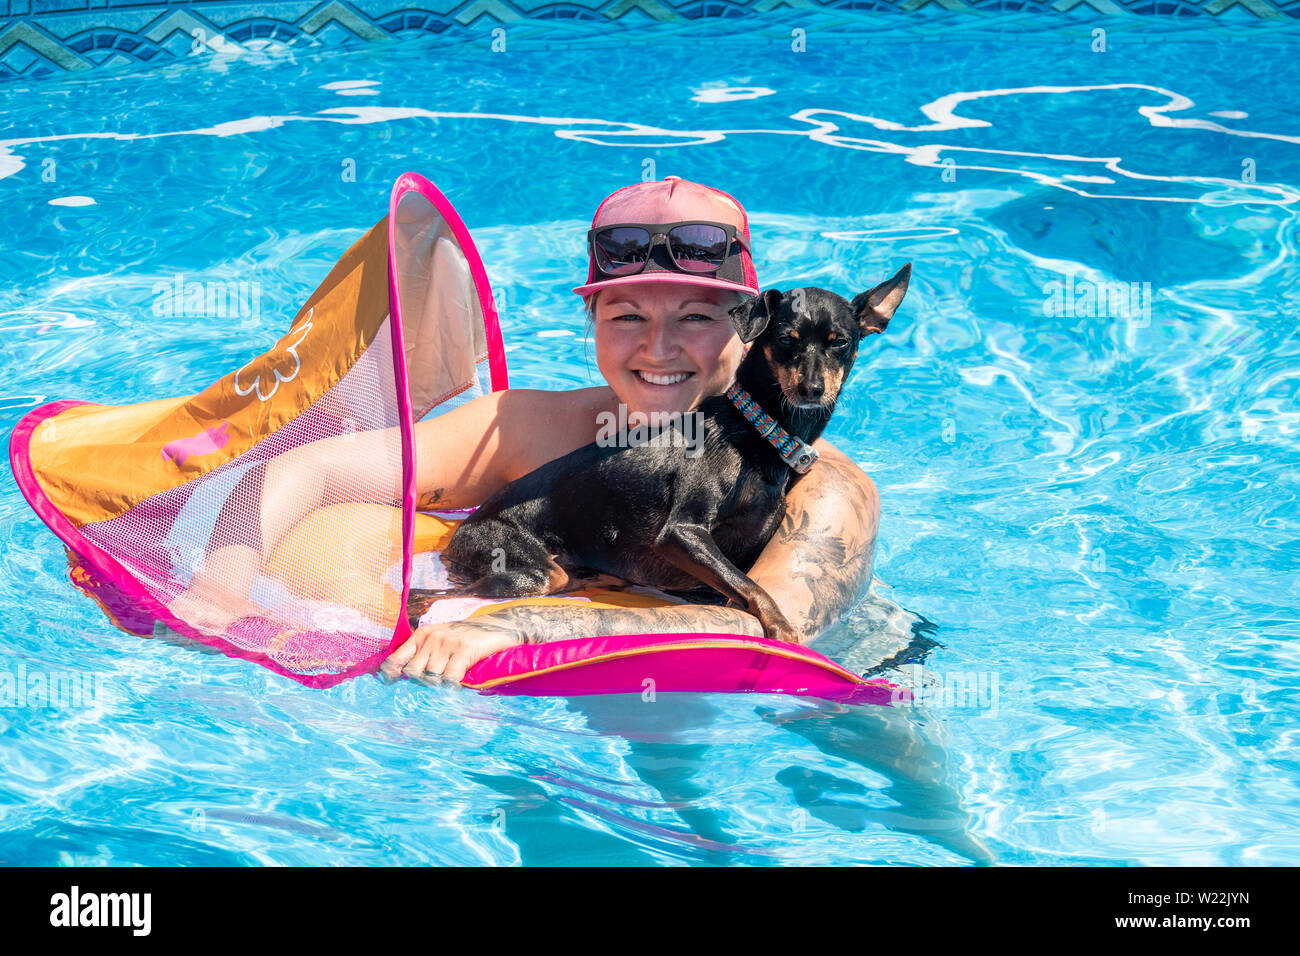 caucasian woman relaxing with black pinscher dog on a flotation device in the swimming pool Stock Photo